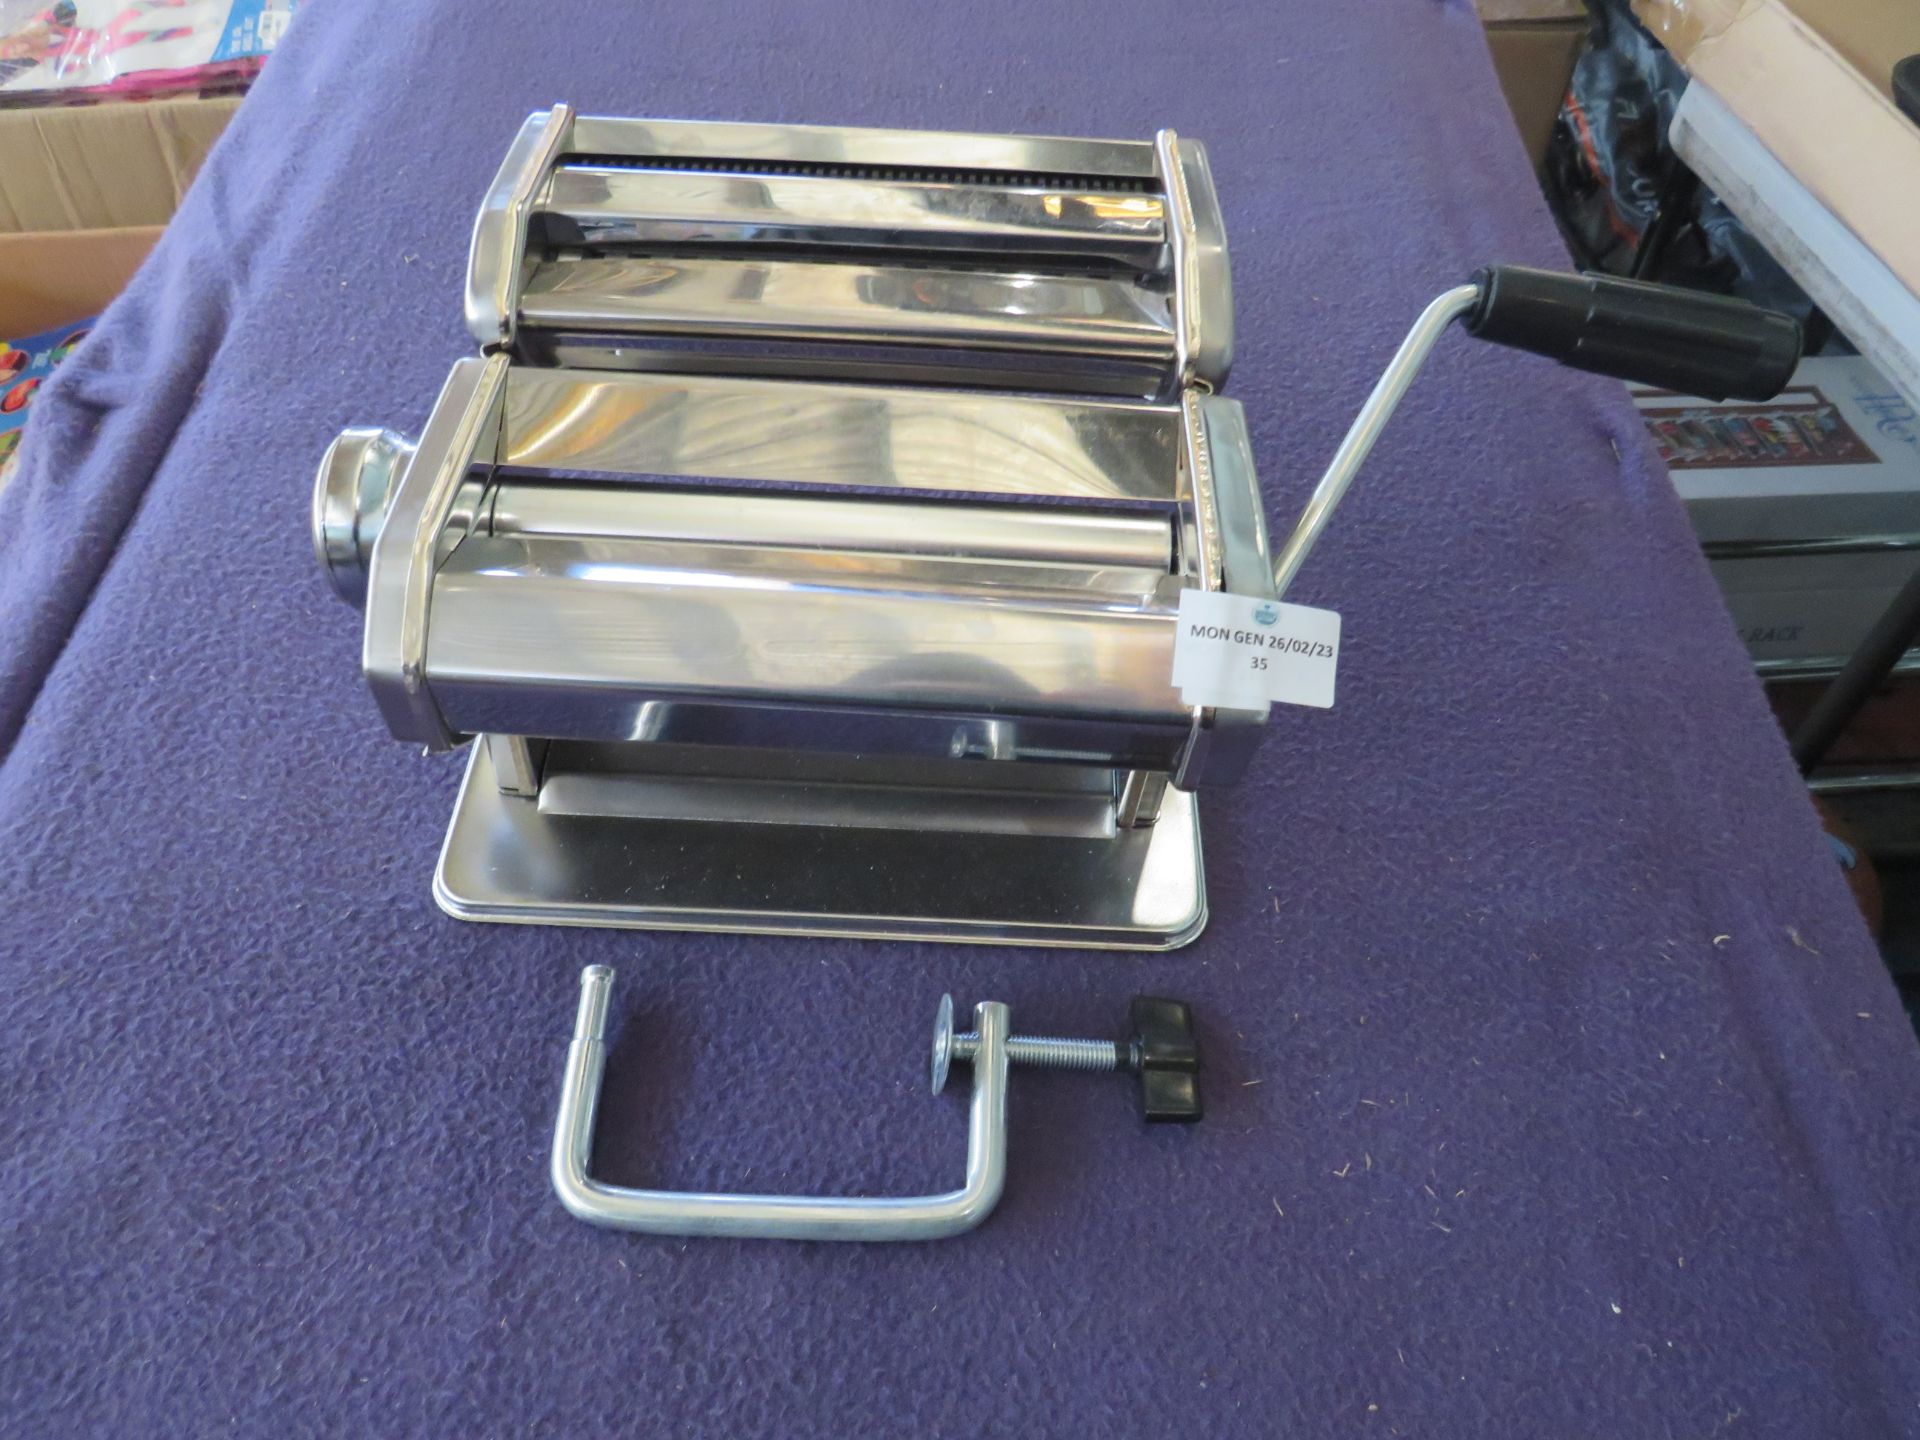 Stainless Steel Pasta Maker - No Packaging.